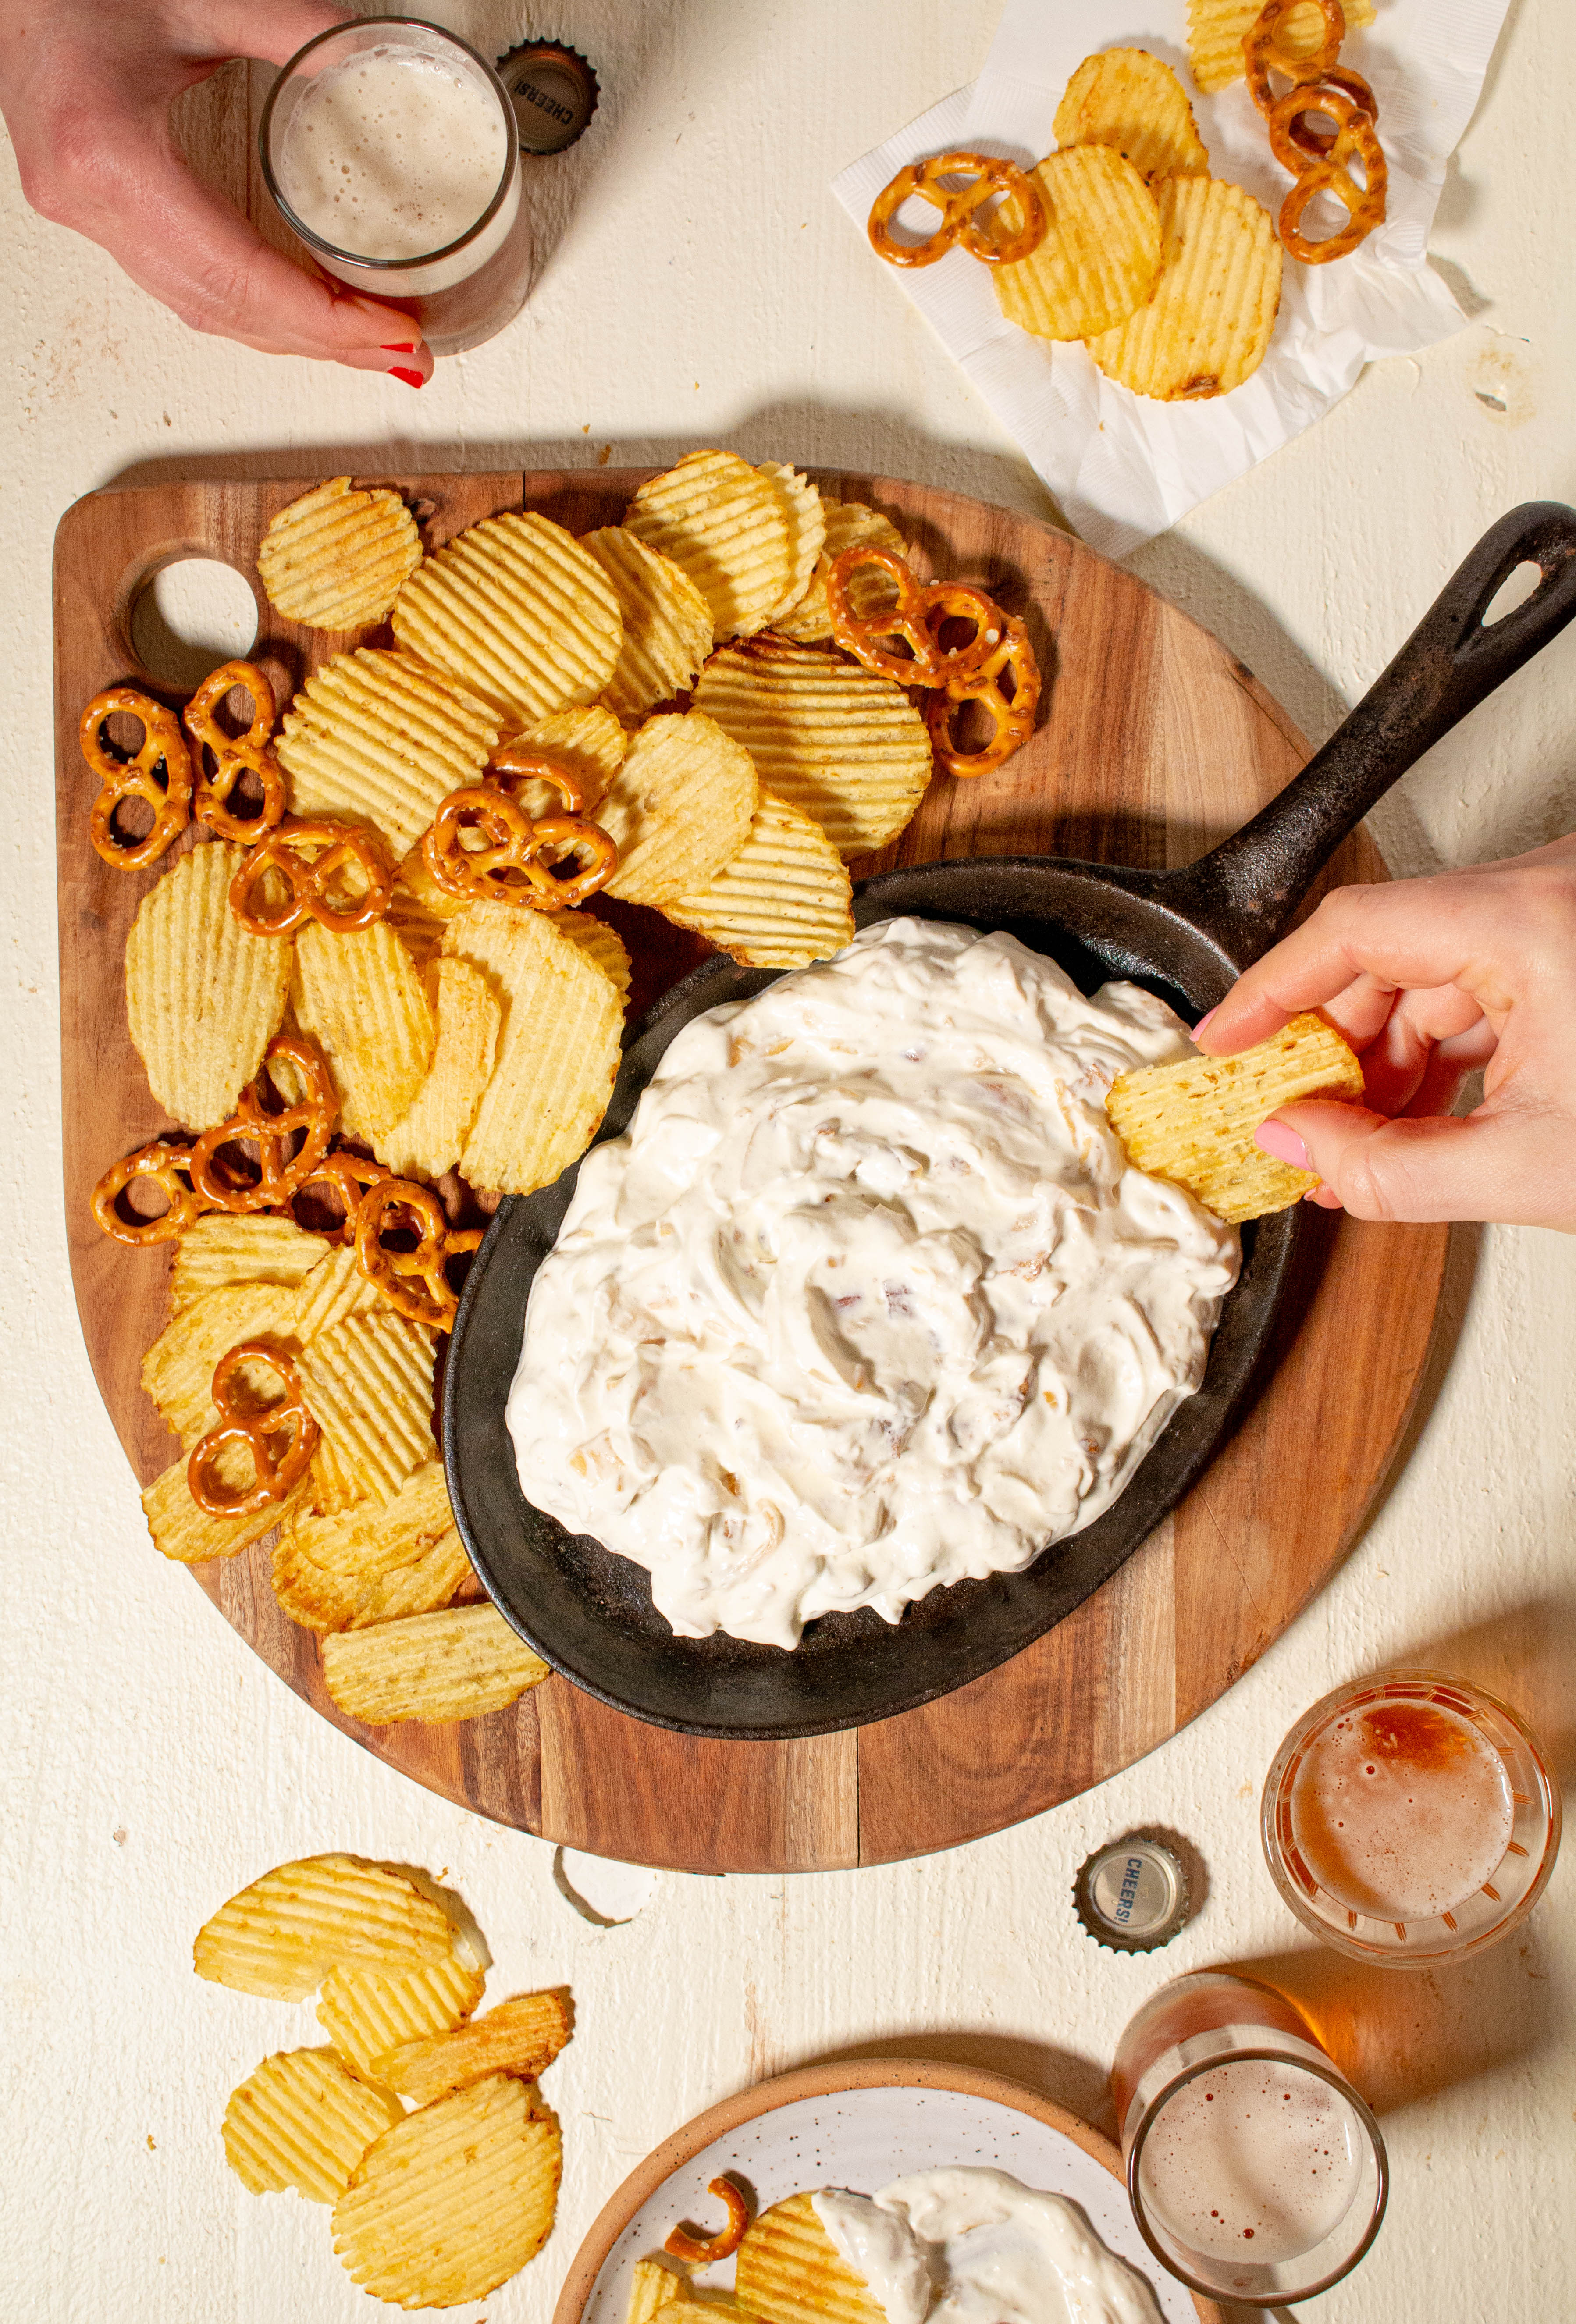 Cutting board with oval cast-iron pan with swirls of dip surrounded by chips, mini pretzels and beer.